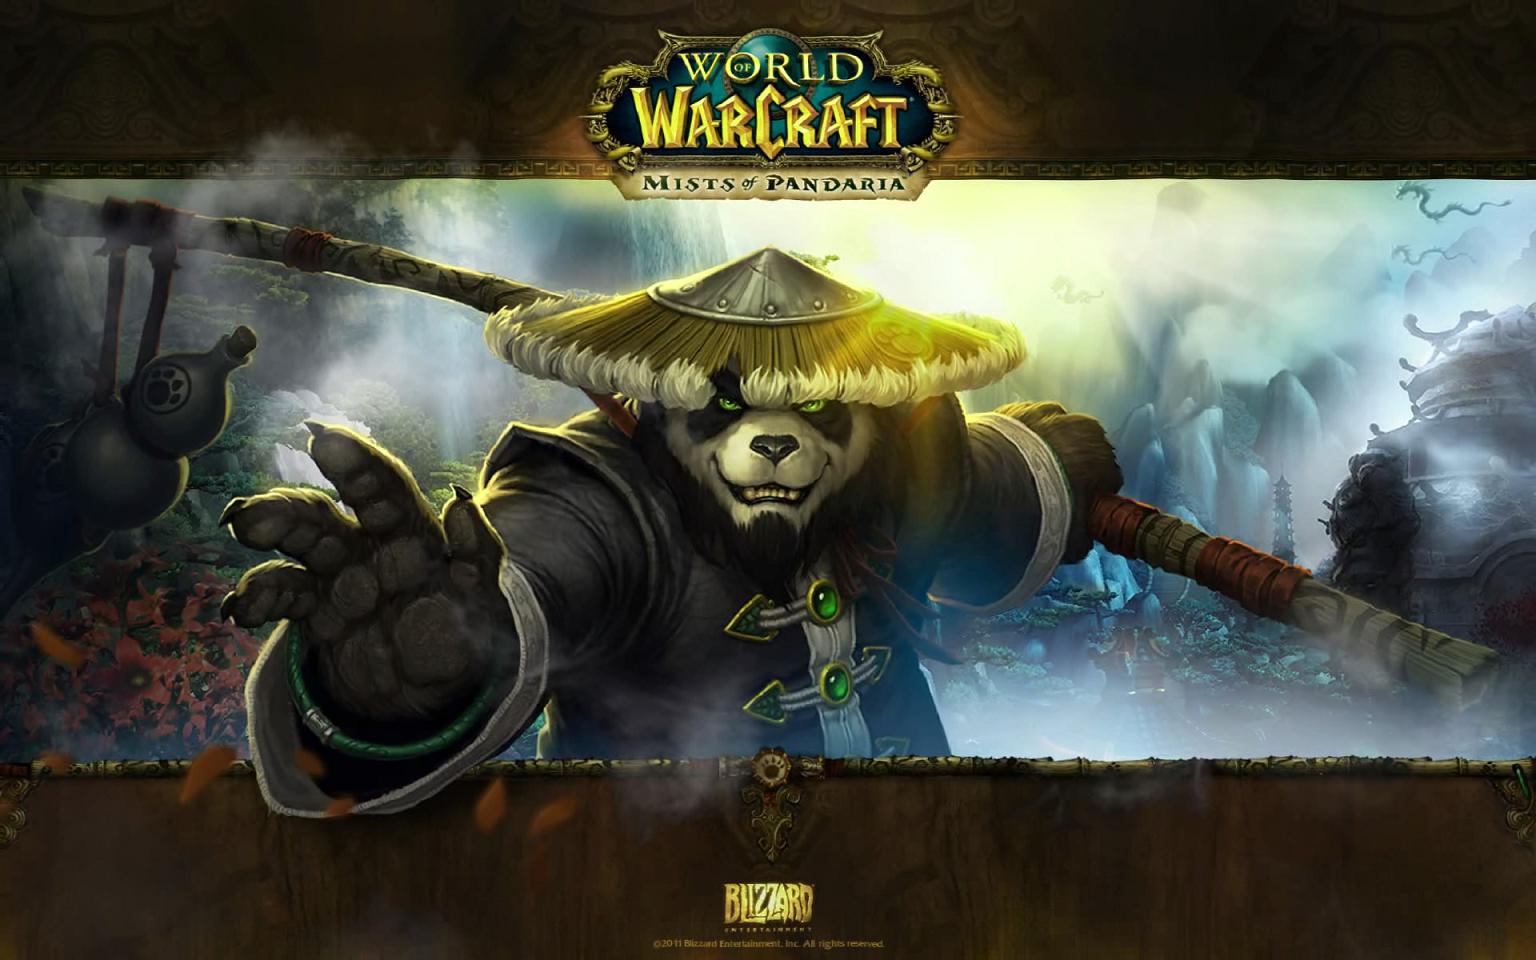 Is World of Warcraft Releasing Content Too Quickly?